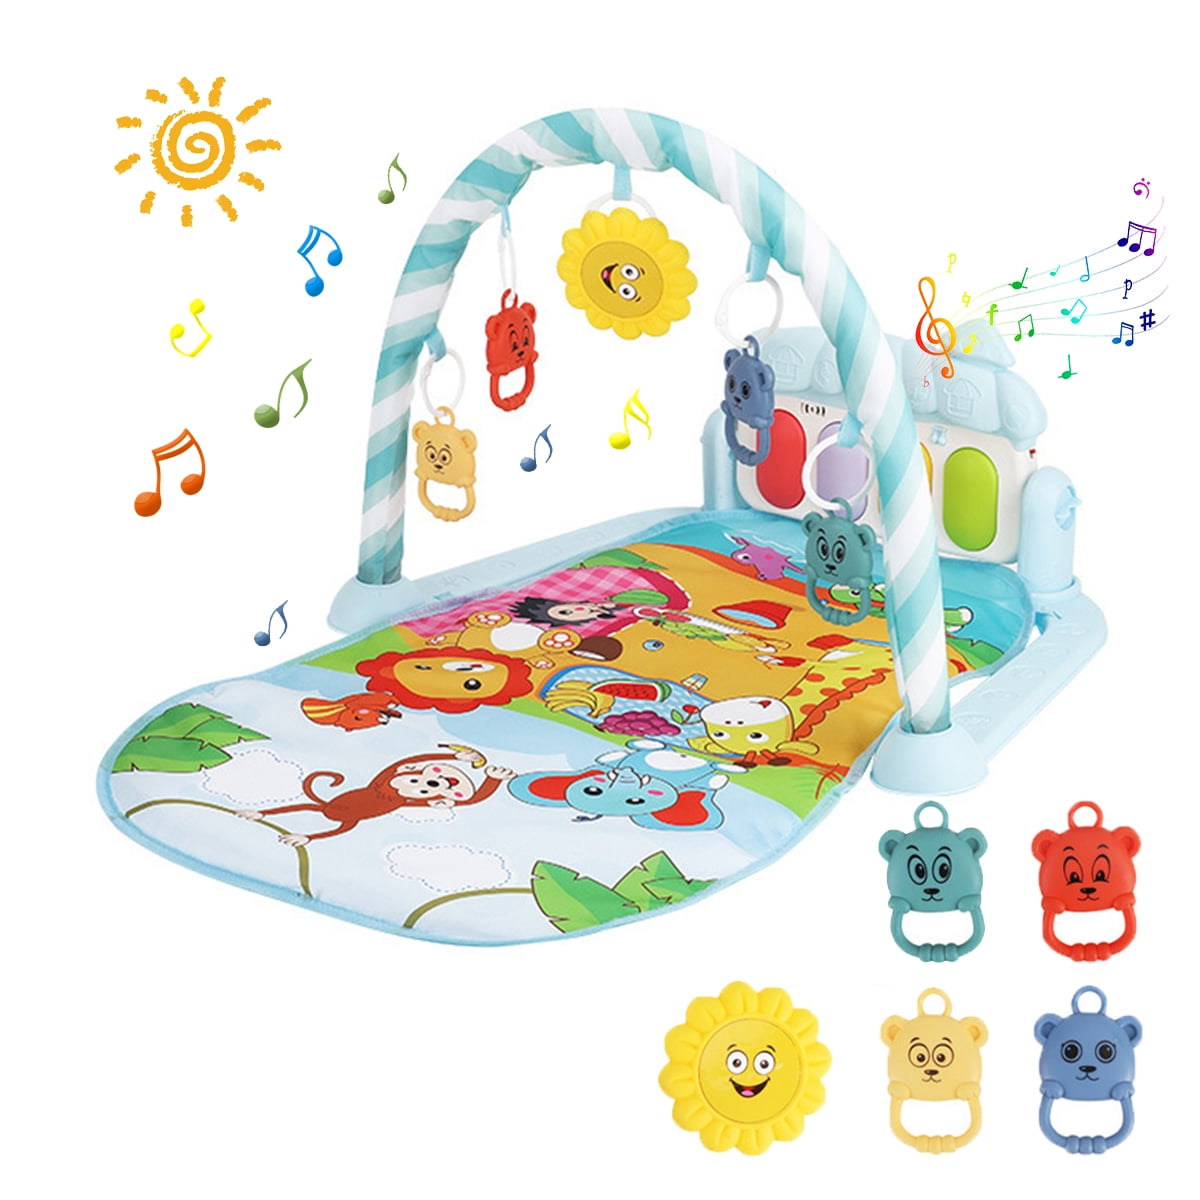  Water Effect Children's Tuff Tray Play Mat - 33.8 x 33.8  Inches - Vinyl - Tuff Tray NOT Included : Baby